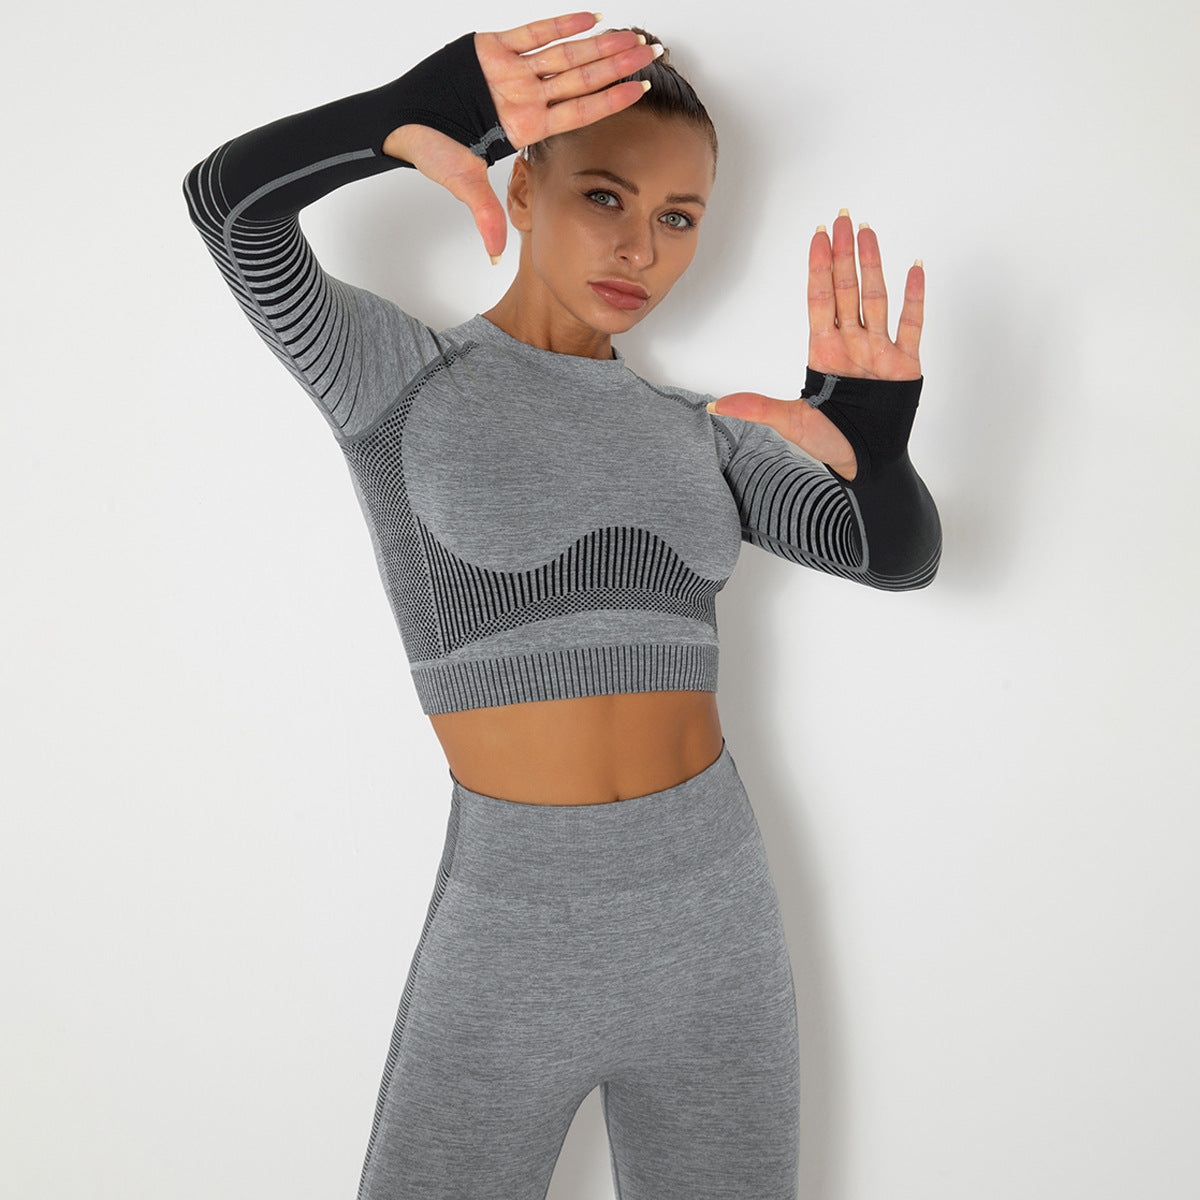 Seamless Yoga Suit with Nylon Blend Fabric